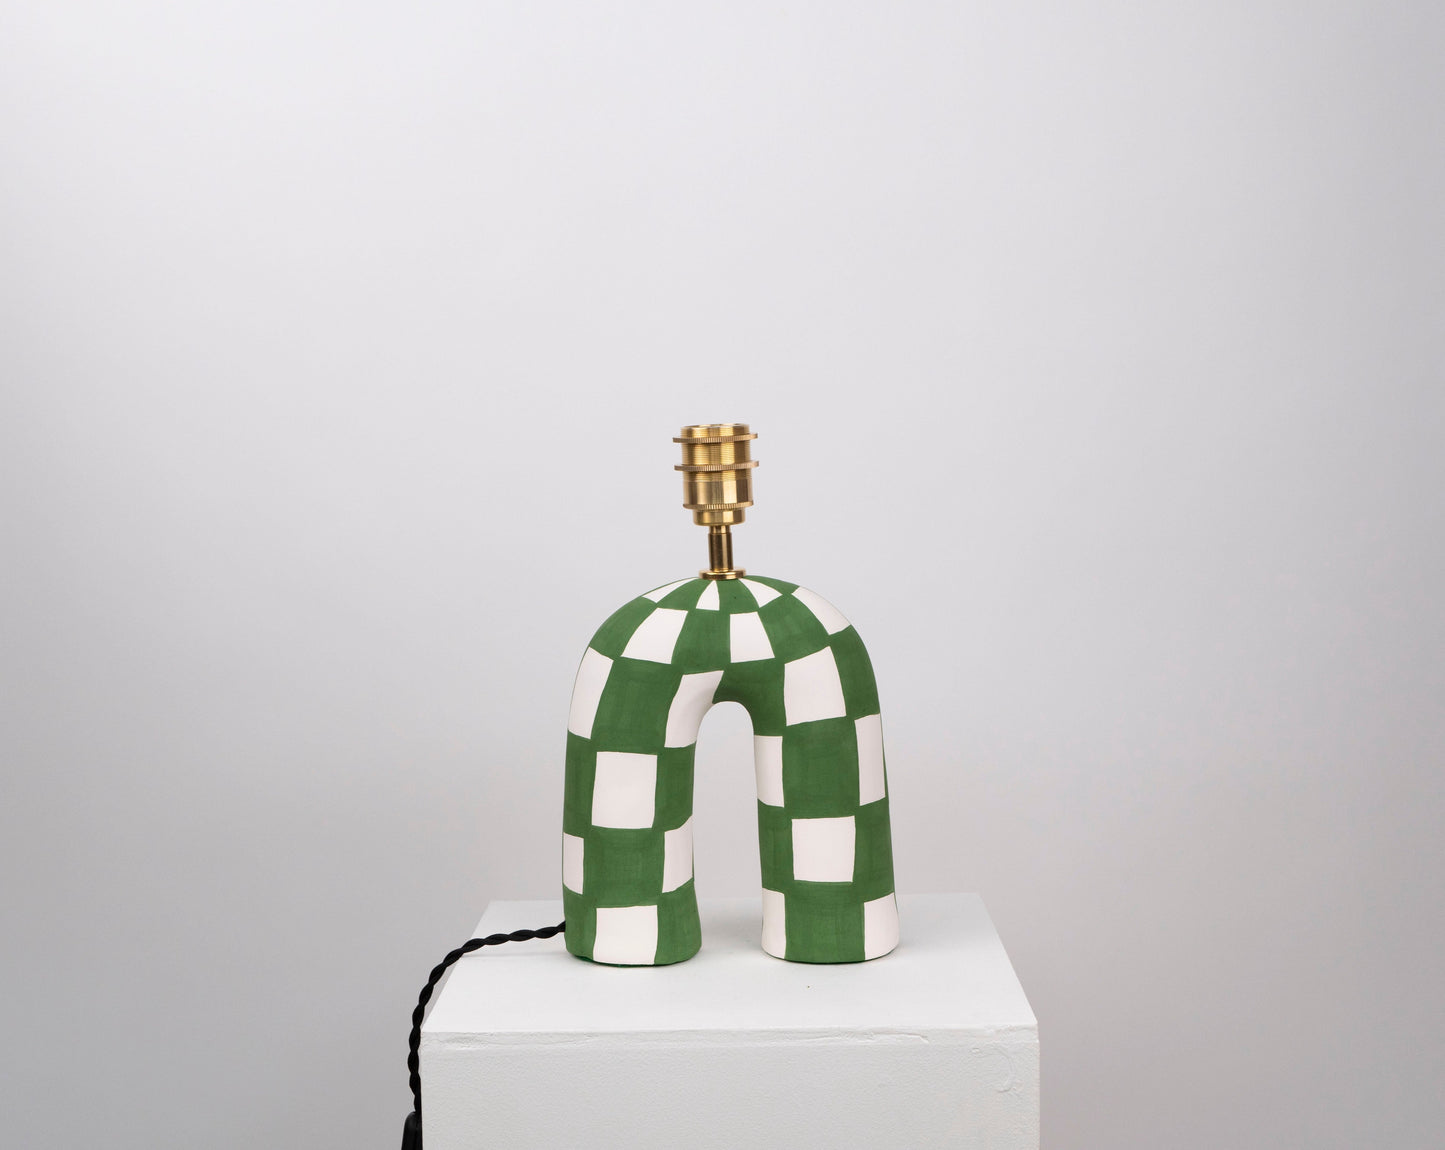 'You' Table Lamp - Forest Green Checkerboard (Matte)